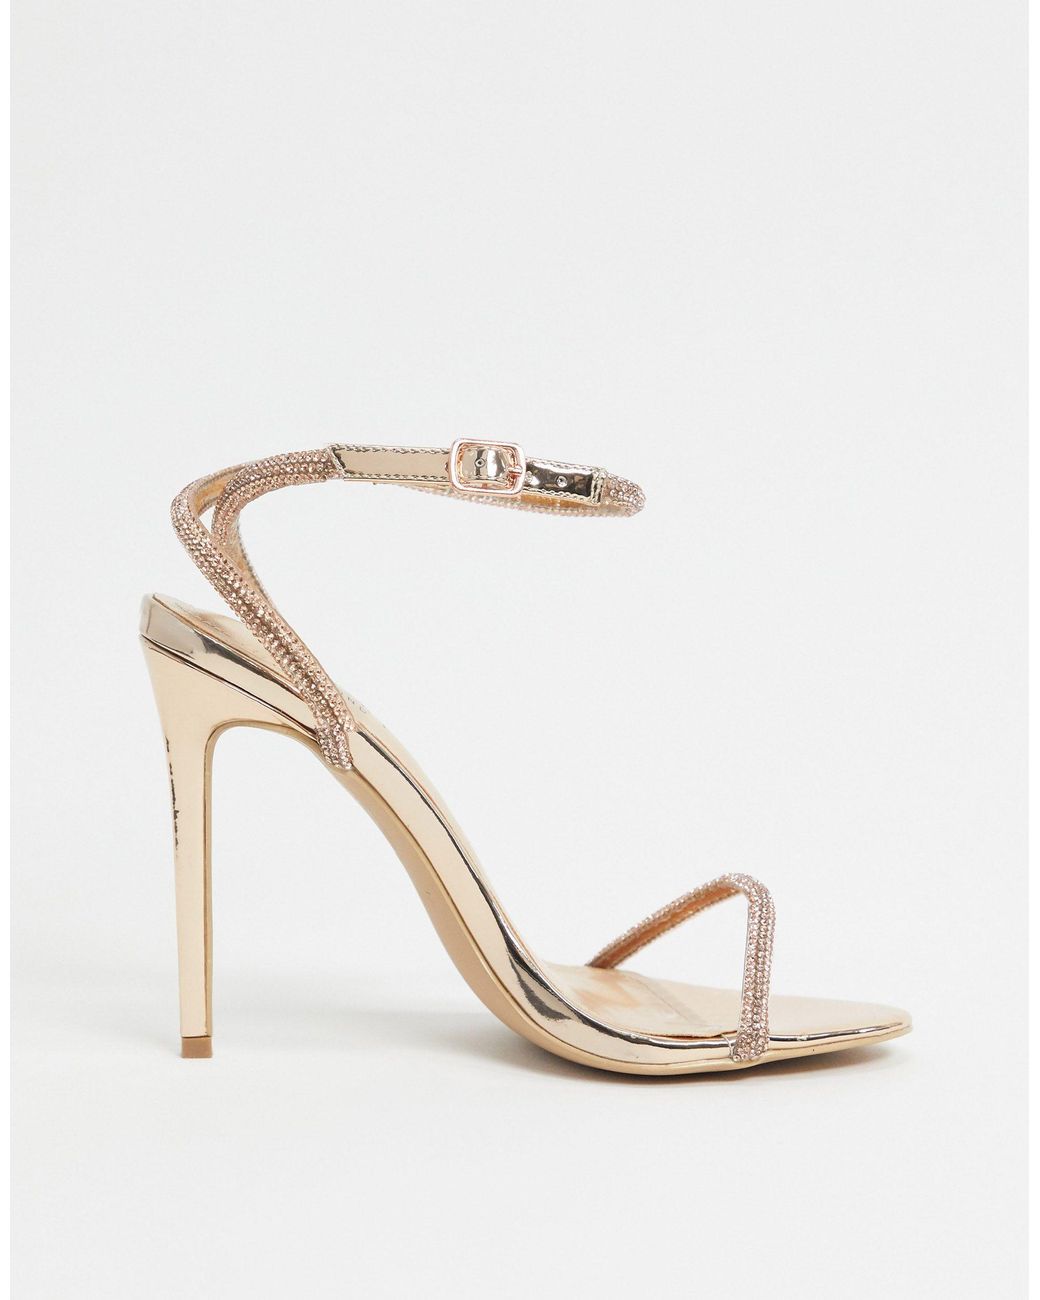 SIMMI London Peony spiral heeled sandals in gold snake | ASOS